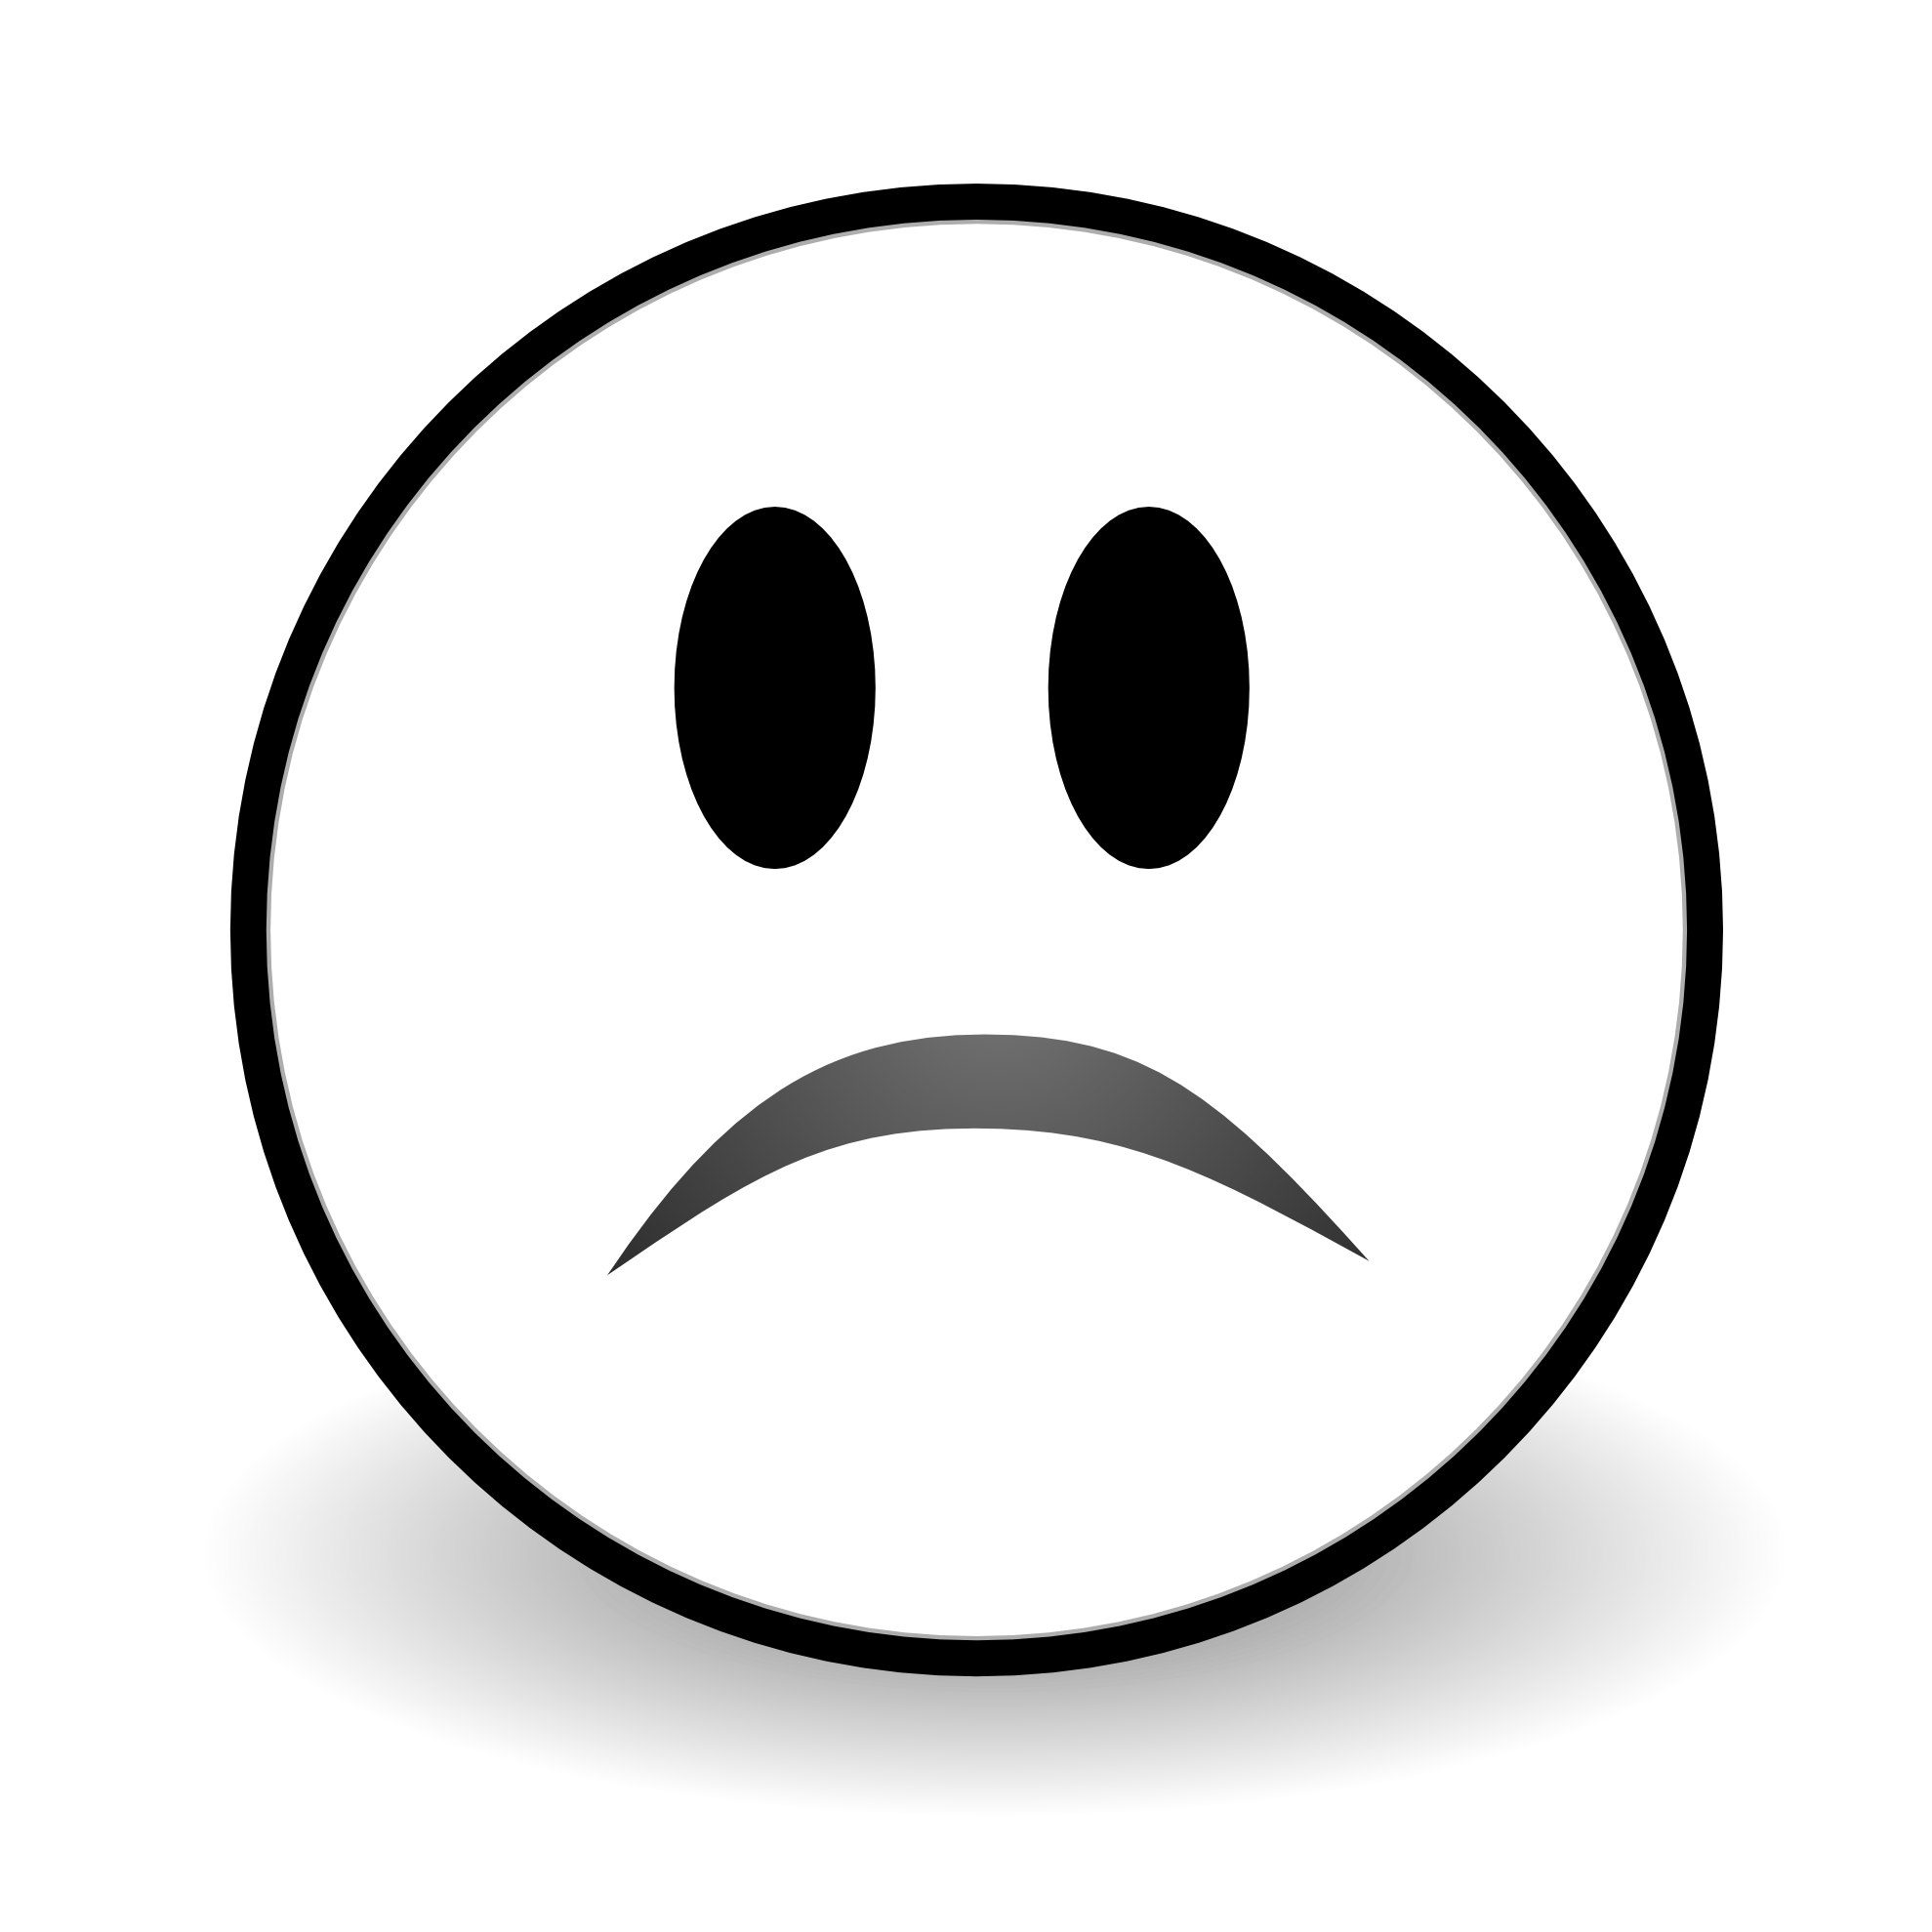 Worry clipart different smiley face. Black and white google